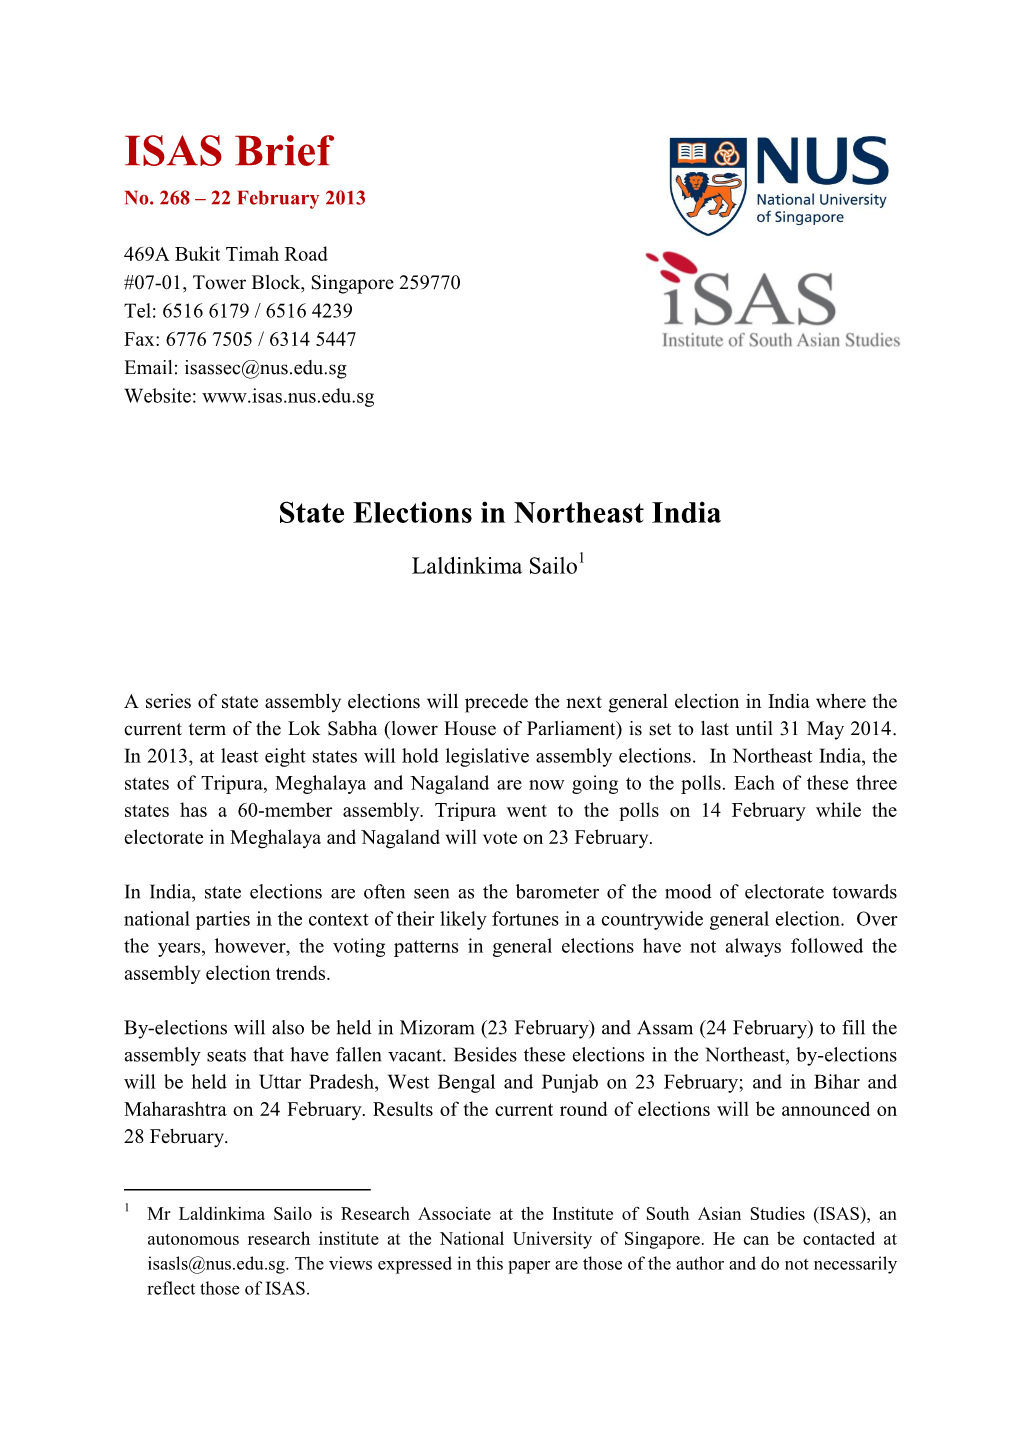 State Elections in Northeast India